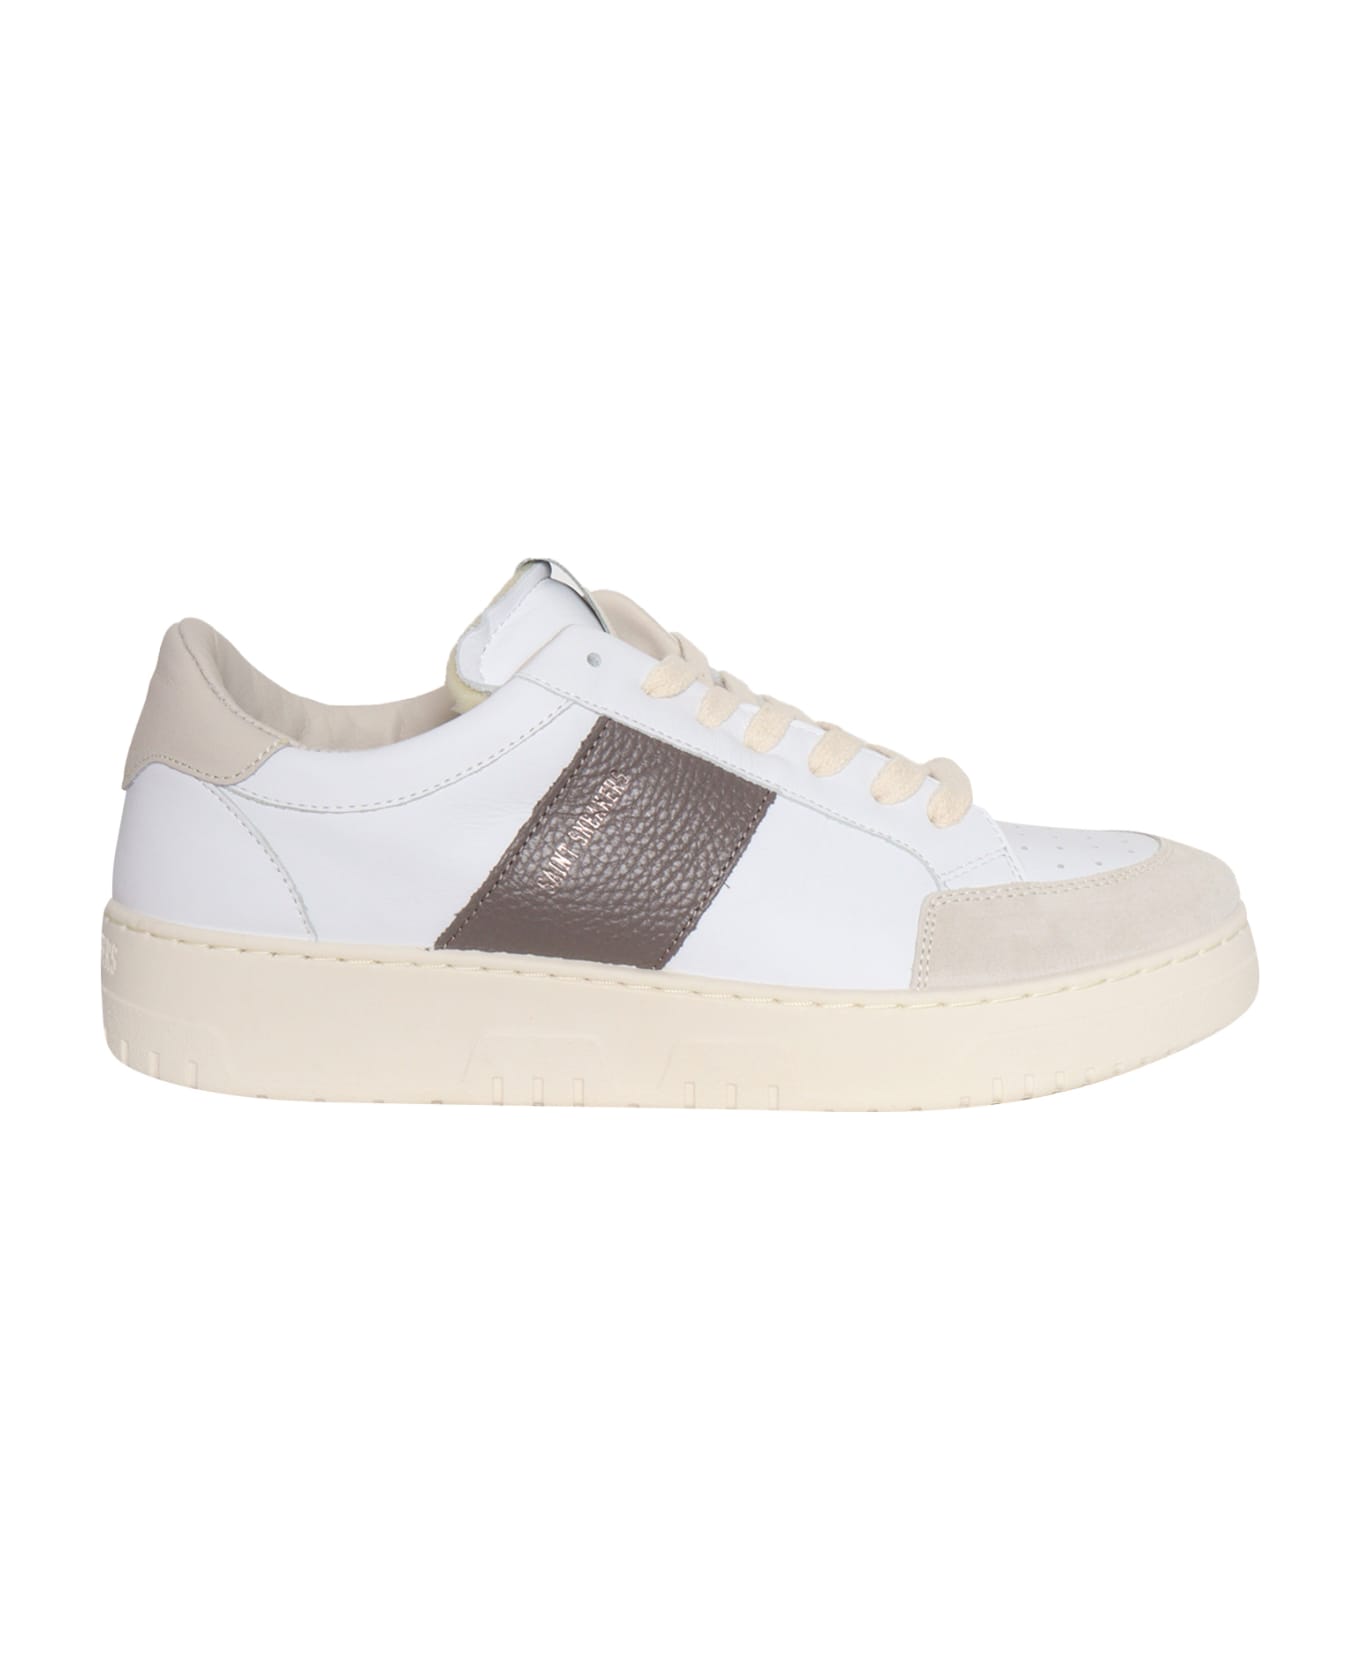 Saint Sneakers Sail Leather Sneakers - WHITE スニーカー